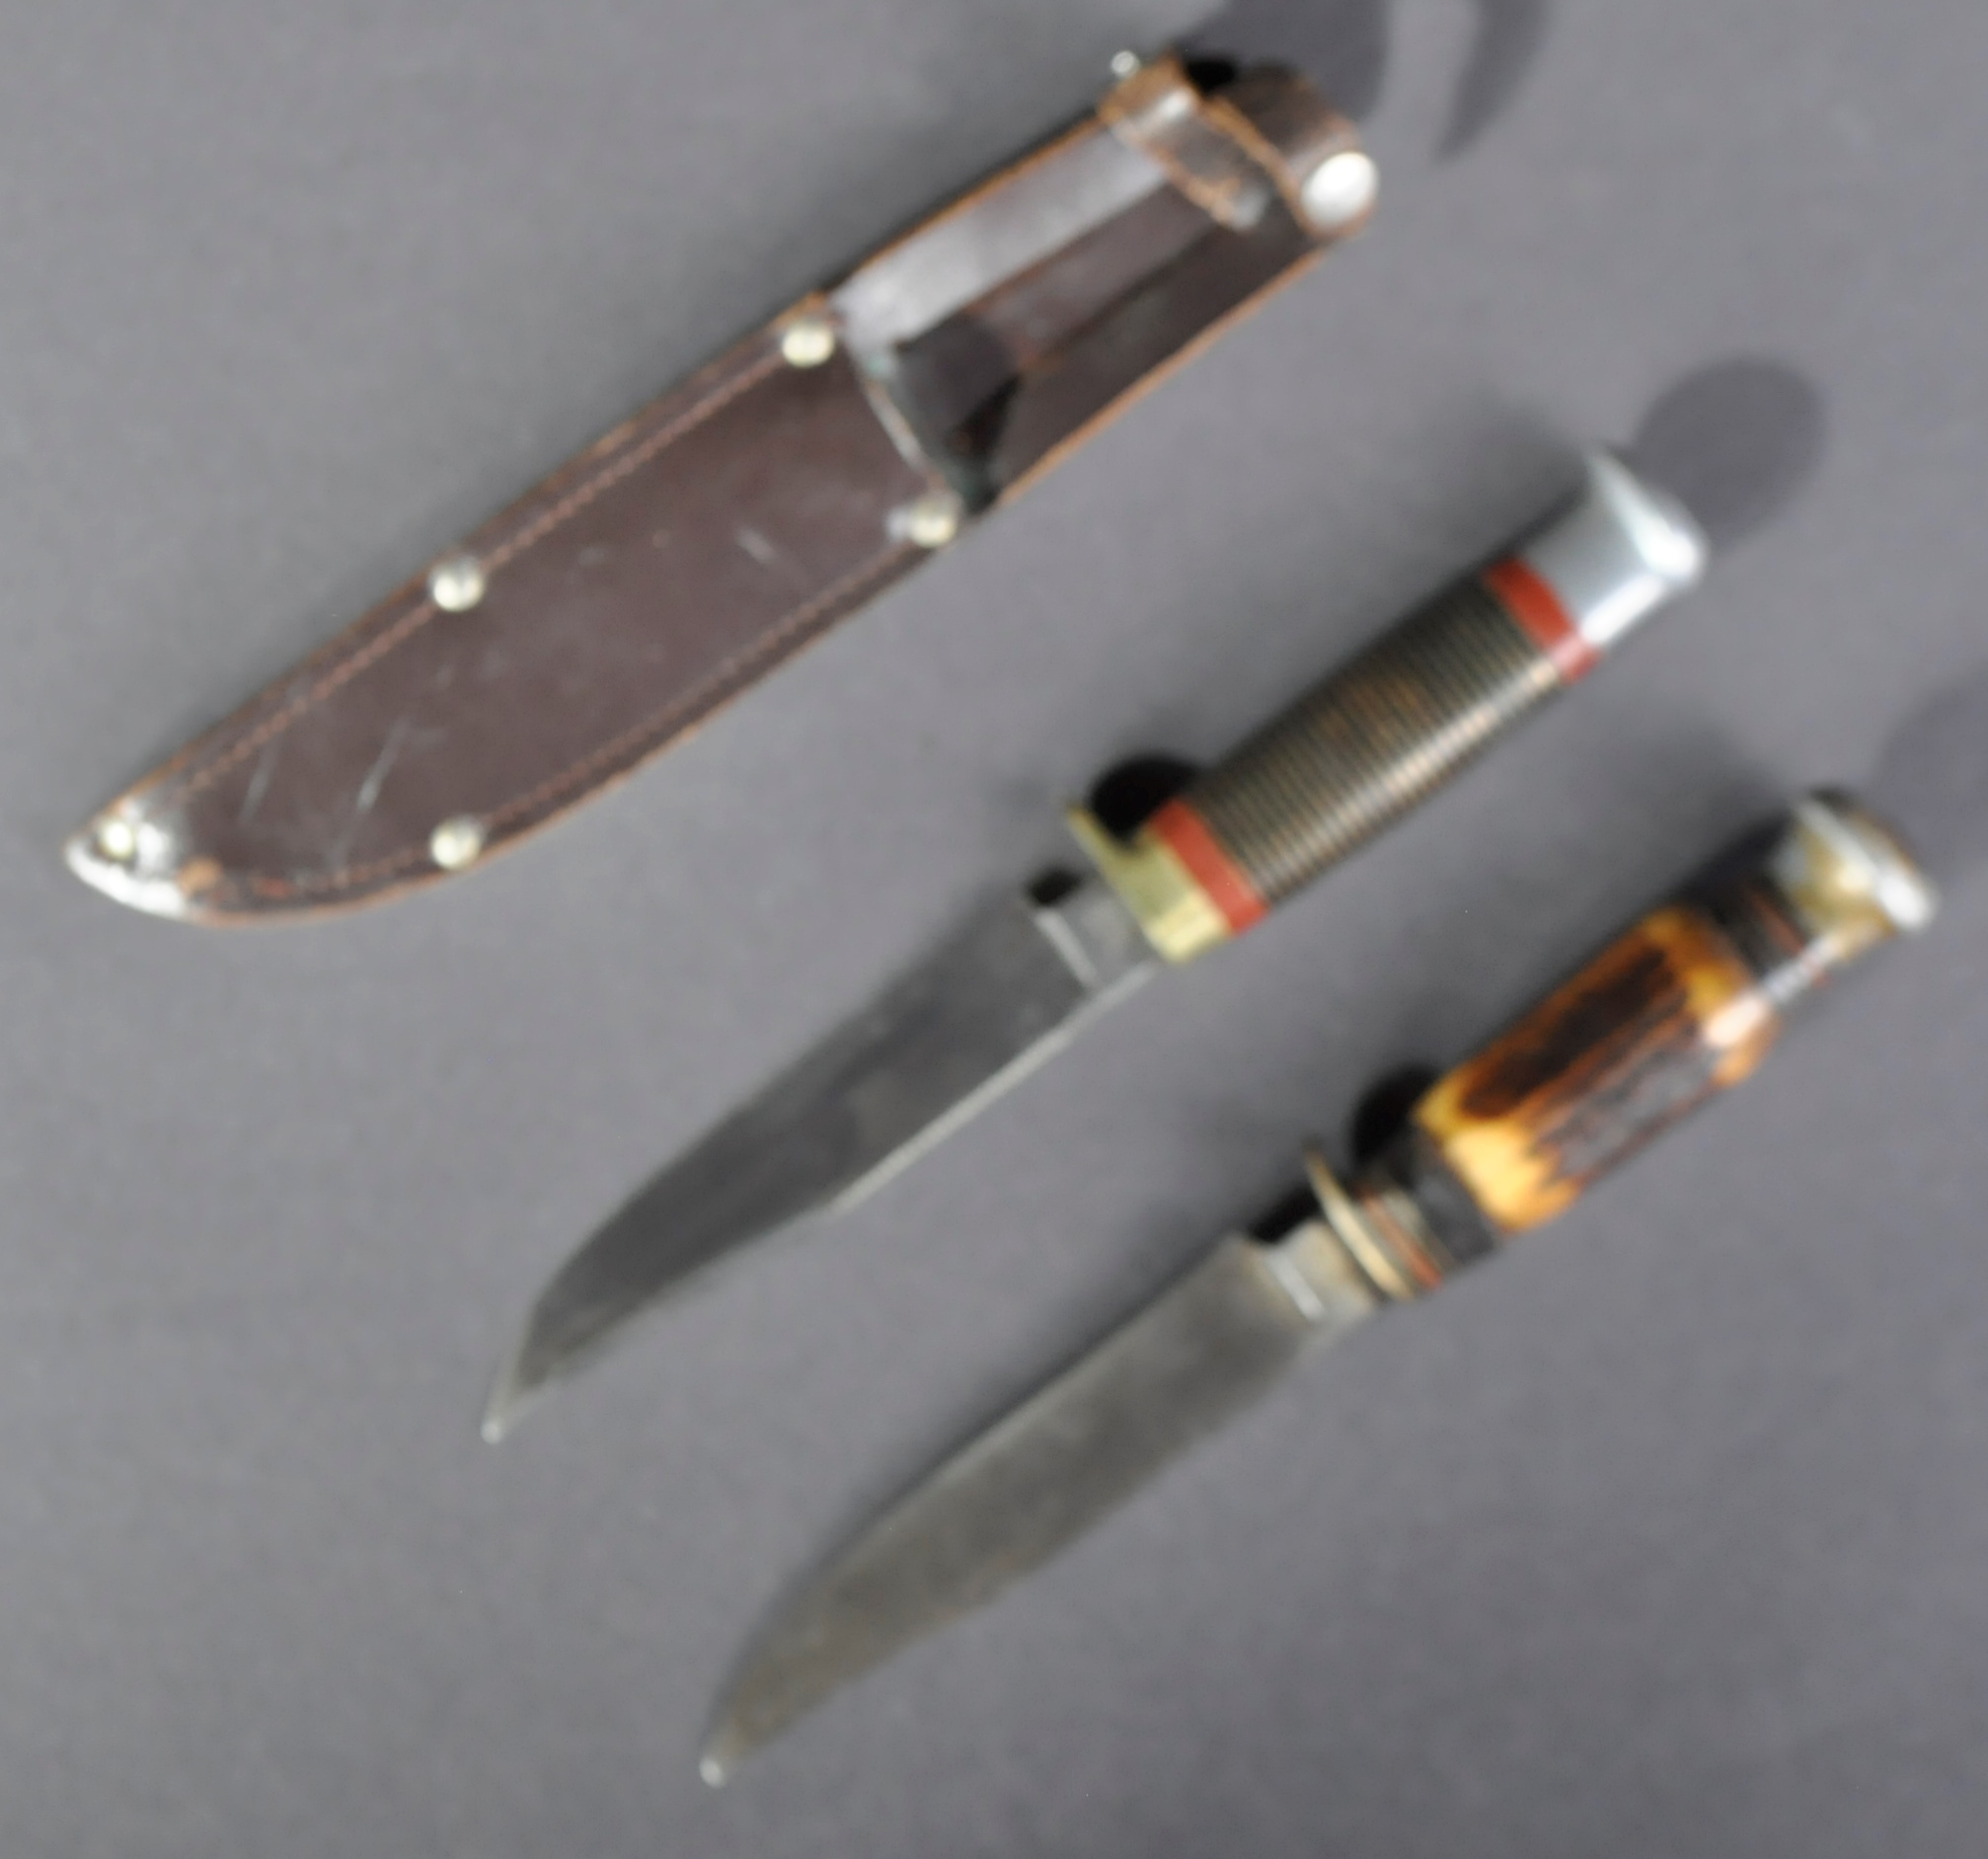 EDGED WEAPONS - TWO VINTAGE KNIVES / DAGGERS - Image 2 of 7